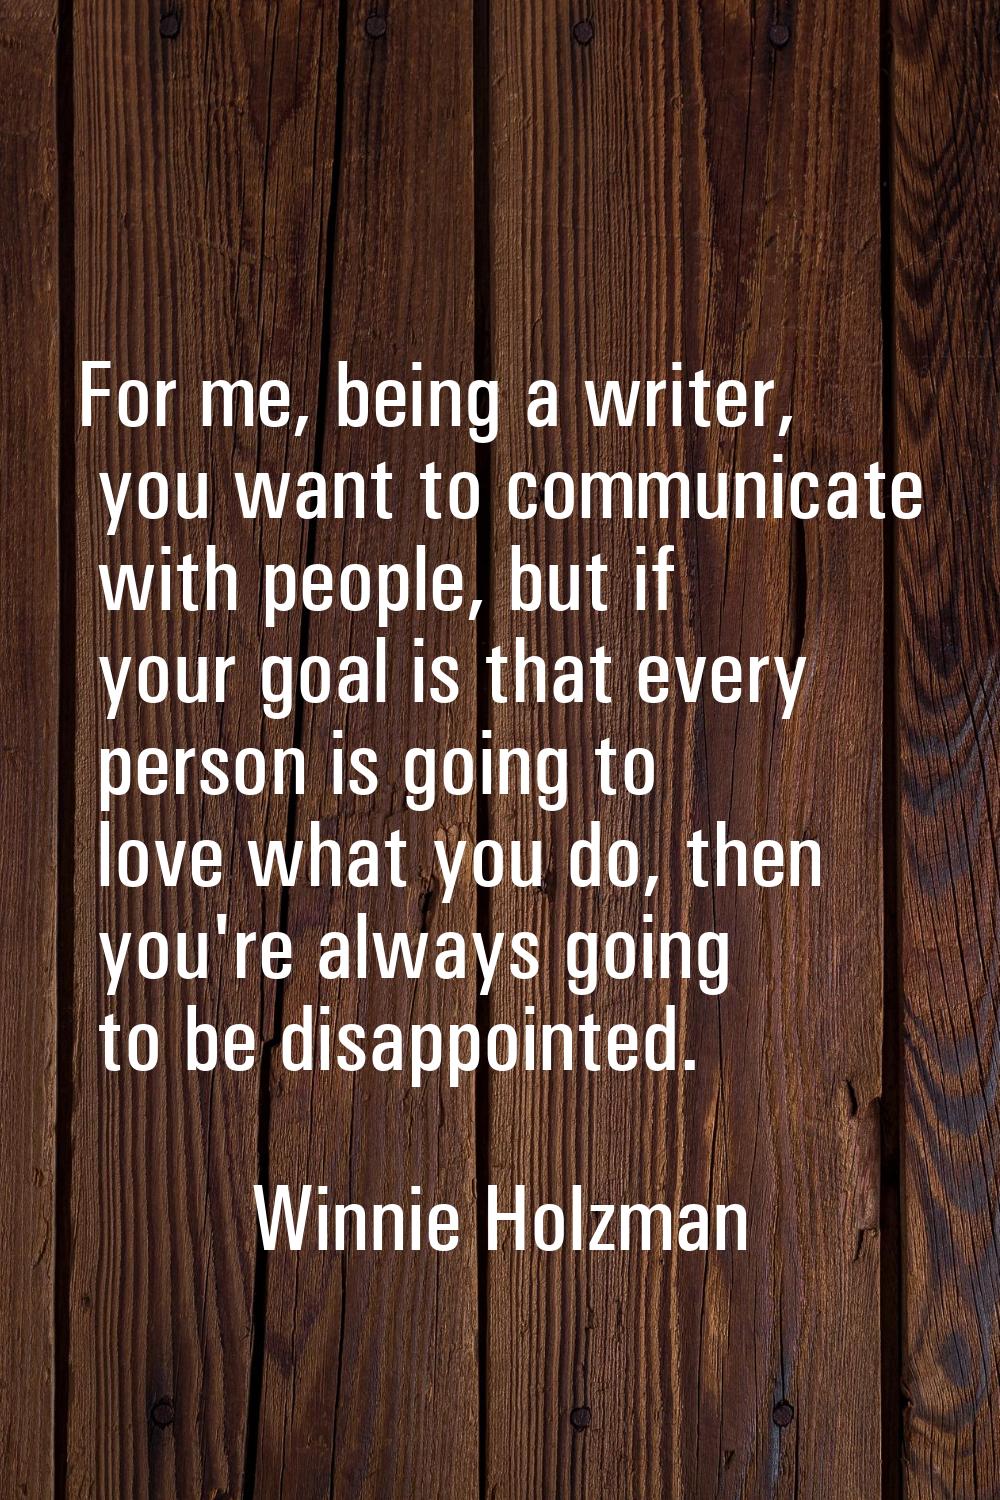 For me, being a writer, you want to communicate with people, but if your goal is that every person 